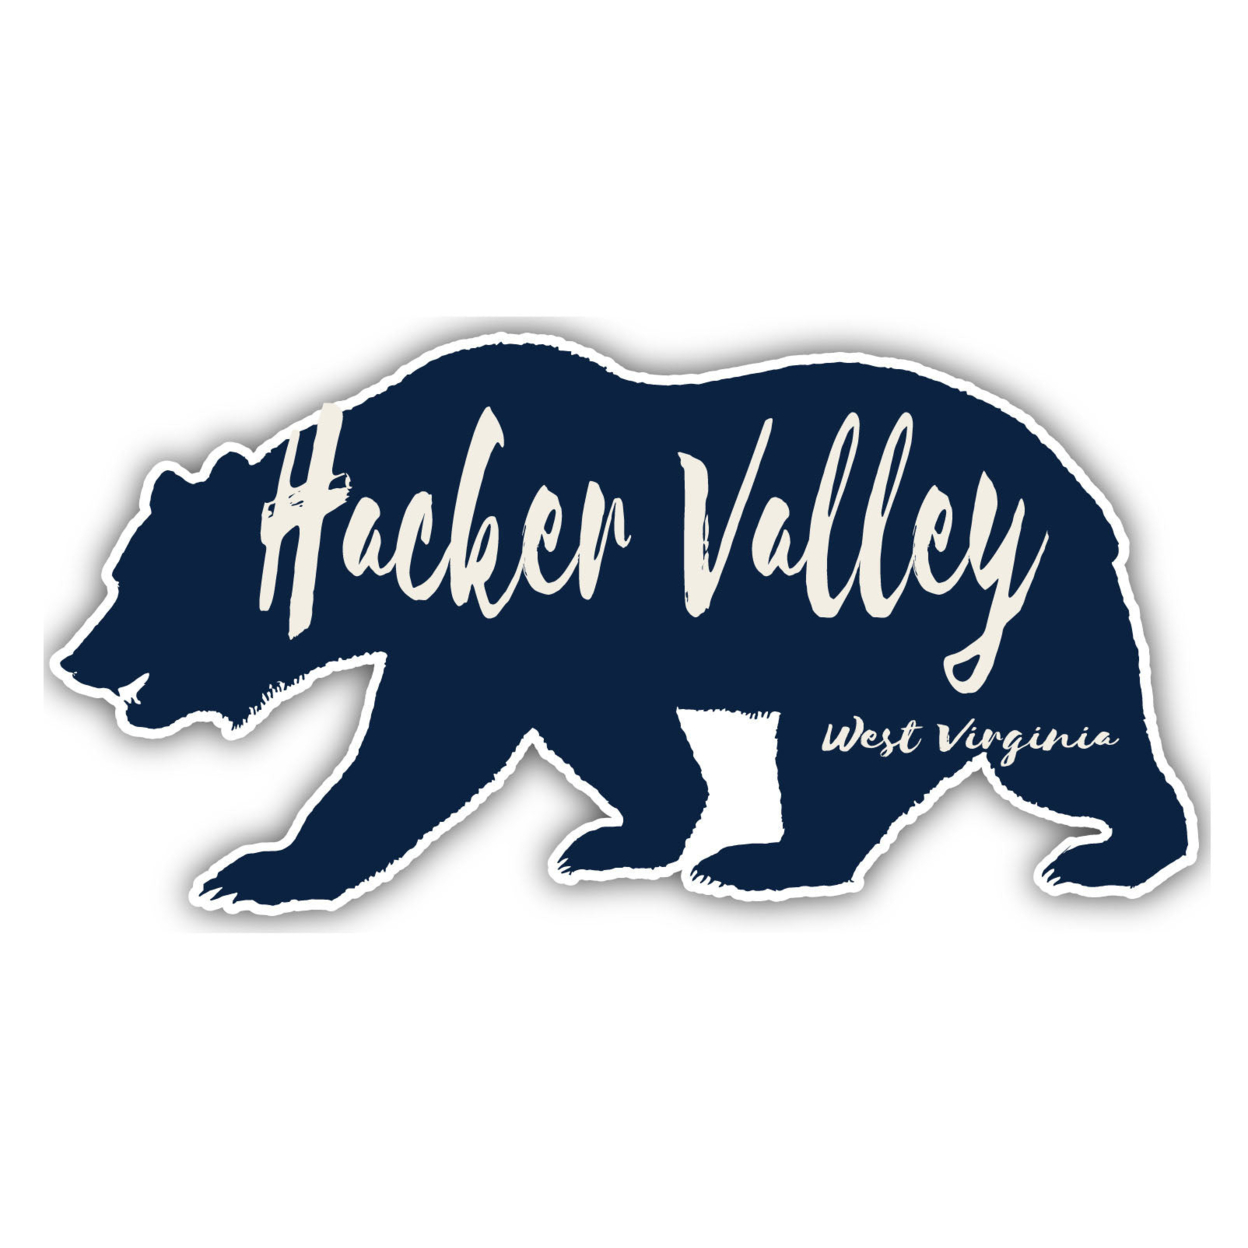 Hacker Valley West Virginia Souvenir Decorative Stickers (Choose Theme And Size) - 4-Pack, 6-Inch, Bear